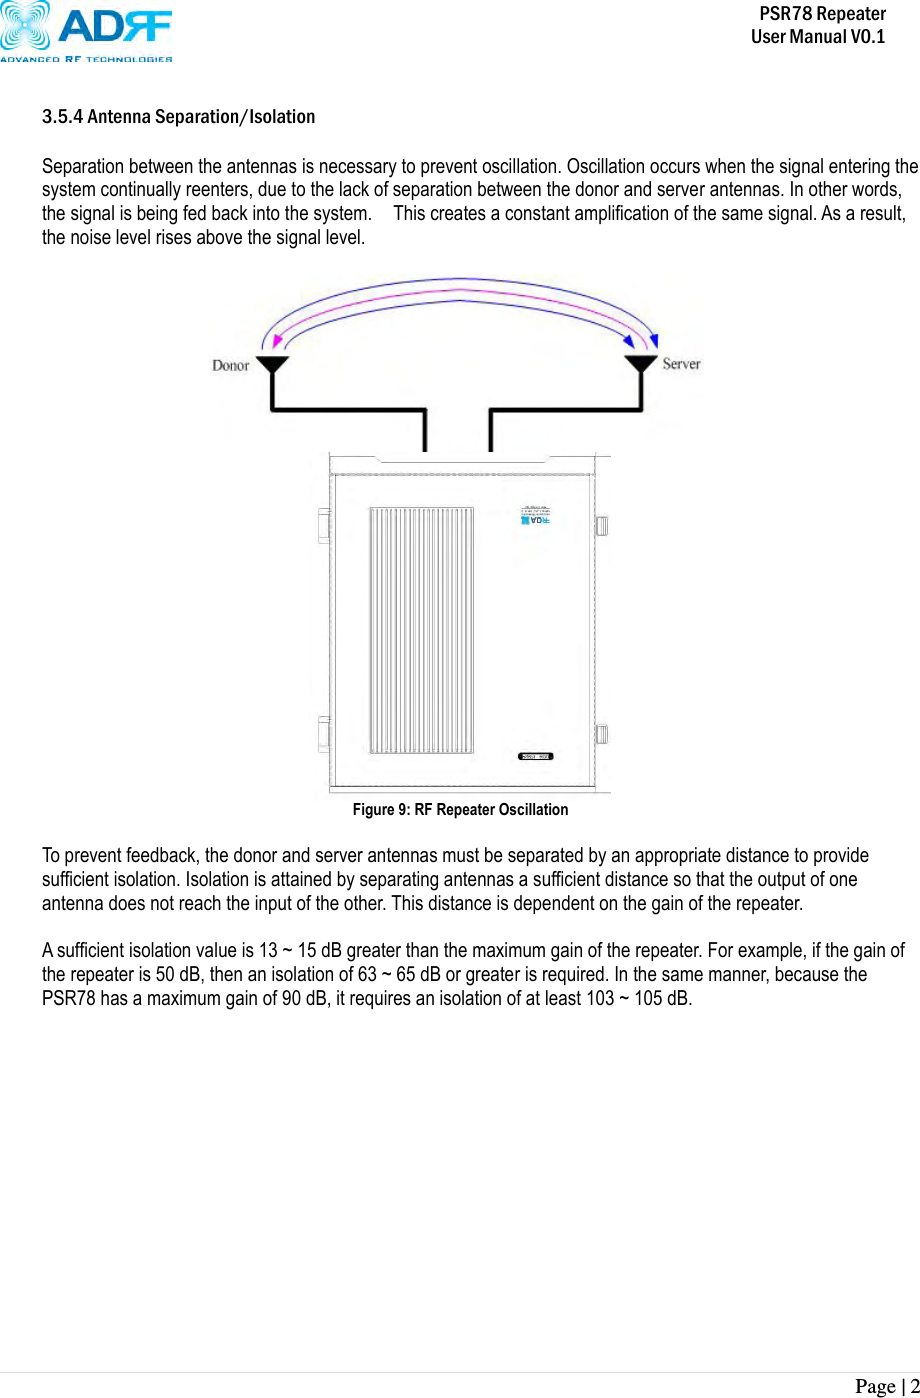           PSR78 Repeater     User Manual V0.1 Page | 2     3.5.4 Antenna Separation/Isolation  Separation between the antennas is necessary to prevent oscillation. Oscillation occurs when the signal entering the system continually reenters, due to the lack of separation between the donor and server antennas. In other words, the signal is being fed back into the system.    This creates a constant amplification of the same signal. As a result, the noise level rises above the signal level.   REPEATER  Figure 9: RF Repeater Oscillation  To prevent feedback, the donor and server antennas must be separated by an appropriate distance to provide sufficient isolation. Isolation is attained by separating antennas a sufficient distance so that the output of one antenna does not reach the input of the other. This distance is dependent on the gain of the repeater.    A sufficient isolation value is 13 ~ 15 dB greater than the maximum gain of the repeater. For example, if the gain of the repeater is 50 dB, then an isolation of 63 ~ 65 dB or greater is required. In the same manner, because the PSR78 has a maximum gain of 90 dB, it requires an isolation of at least 103 ~ 105 dB.  